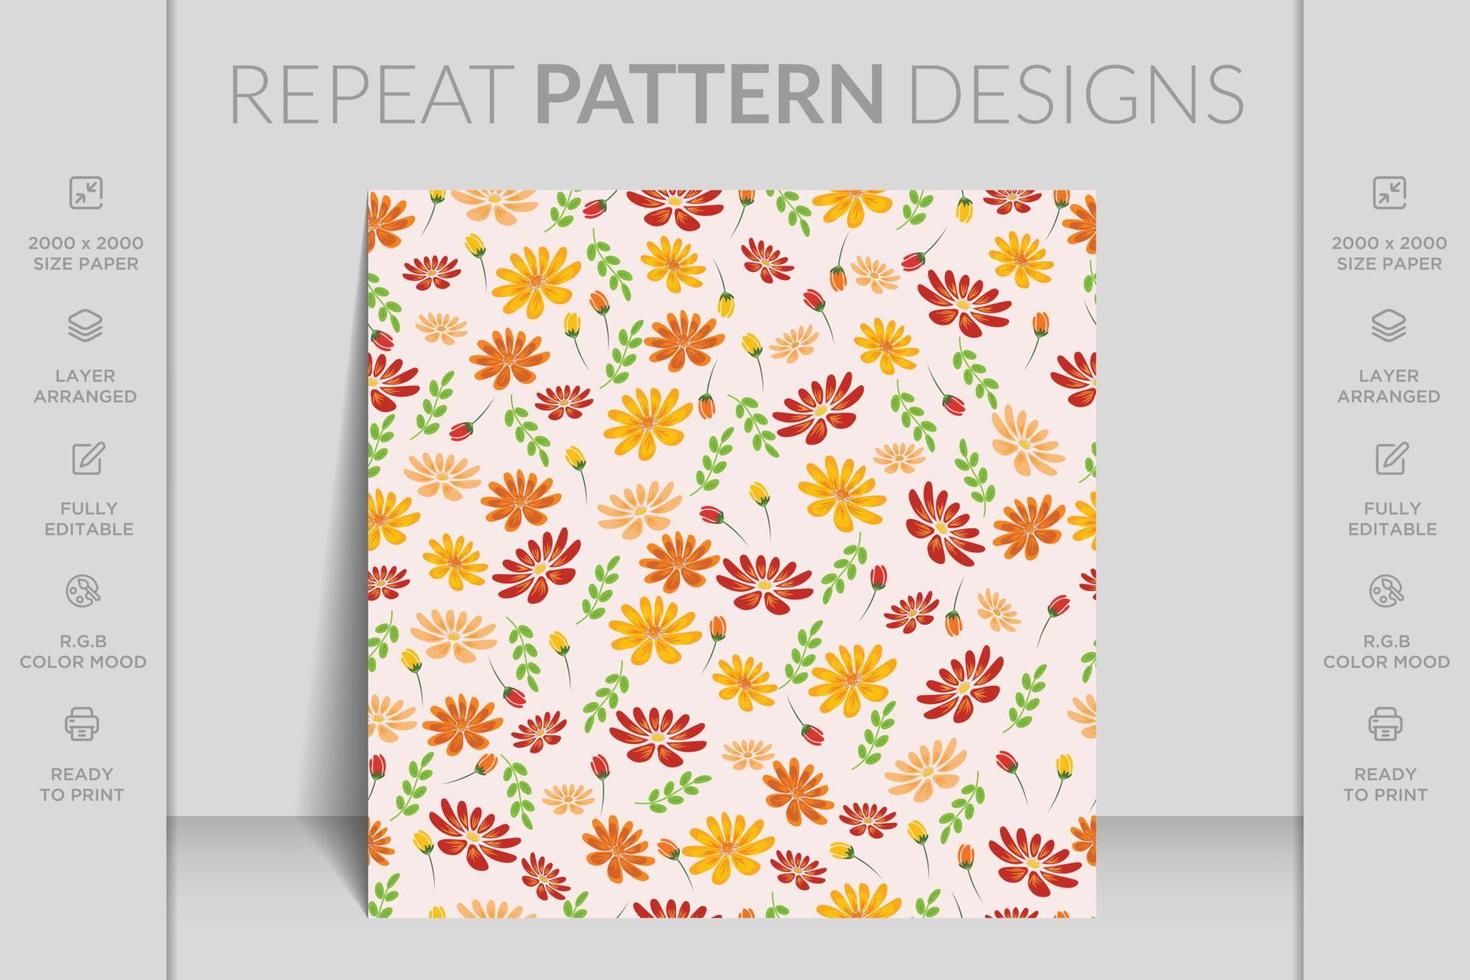 Luxury hand drawn vintage 3d seamless ornamental colorful flowers floral pattern design background vector